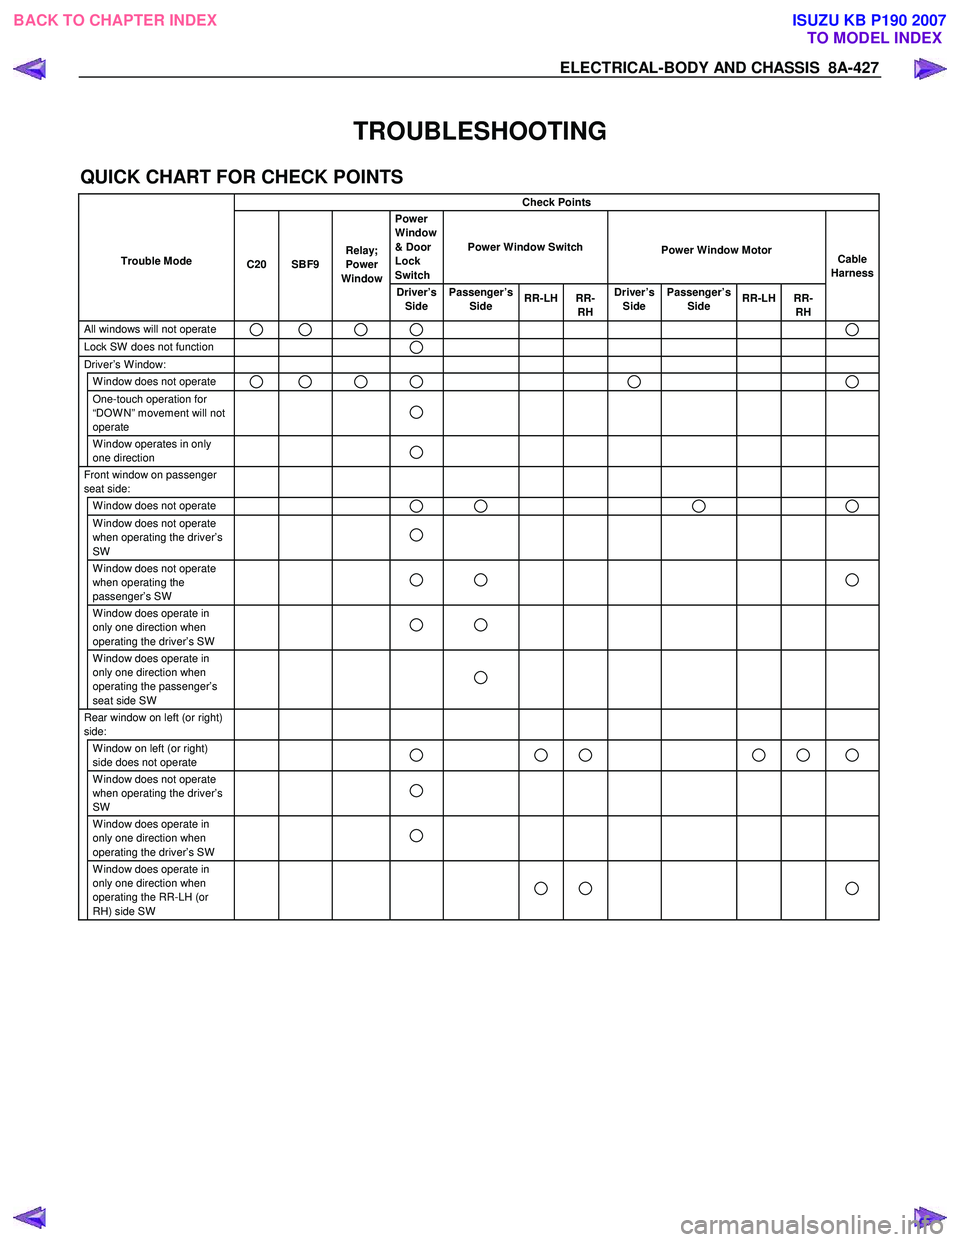 ISUZU KB P190 2007  Workshop Owners Manual ELECTRICAL-BODY AND CHASSIS  8A-427 
 
TROUBLESHOOTING 
QUICK CHART FOR CHECK POINTS 
  Check Points 
  
 
 
Trouble Mode      Power 
Window 
& Door 
Lock 
Switch  Power Window Switch 
Power Window Mo